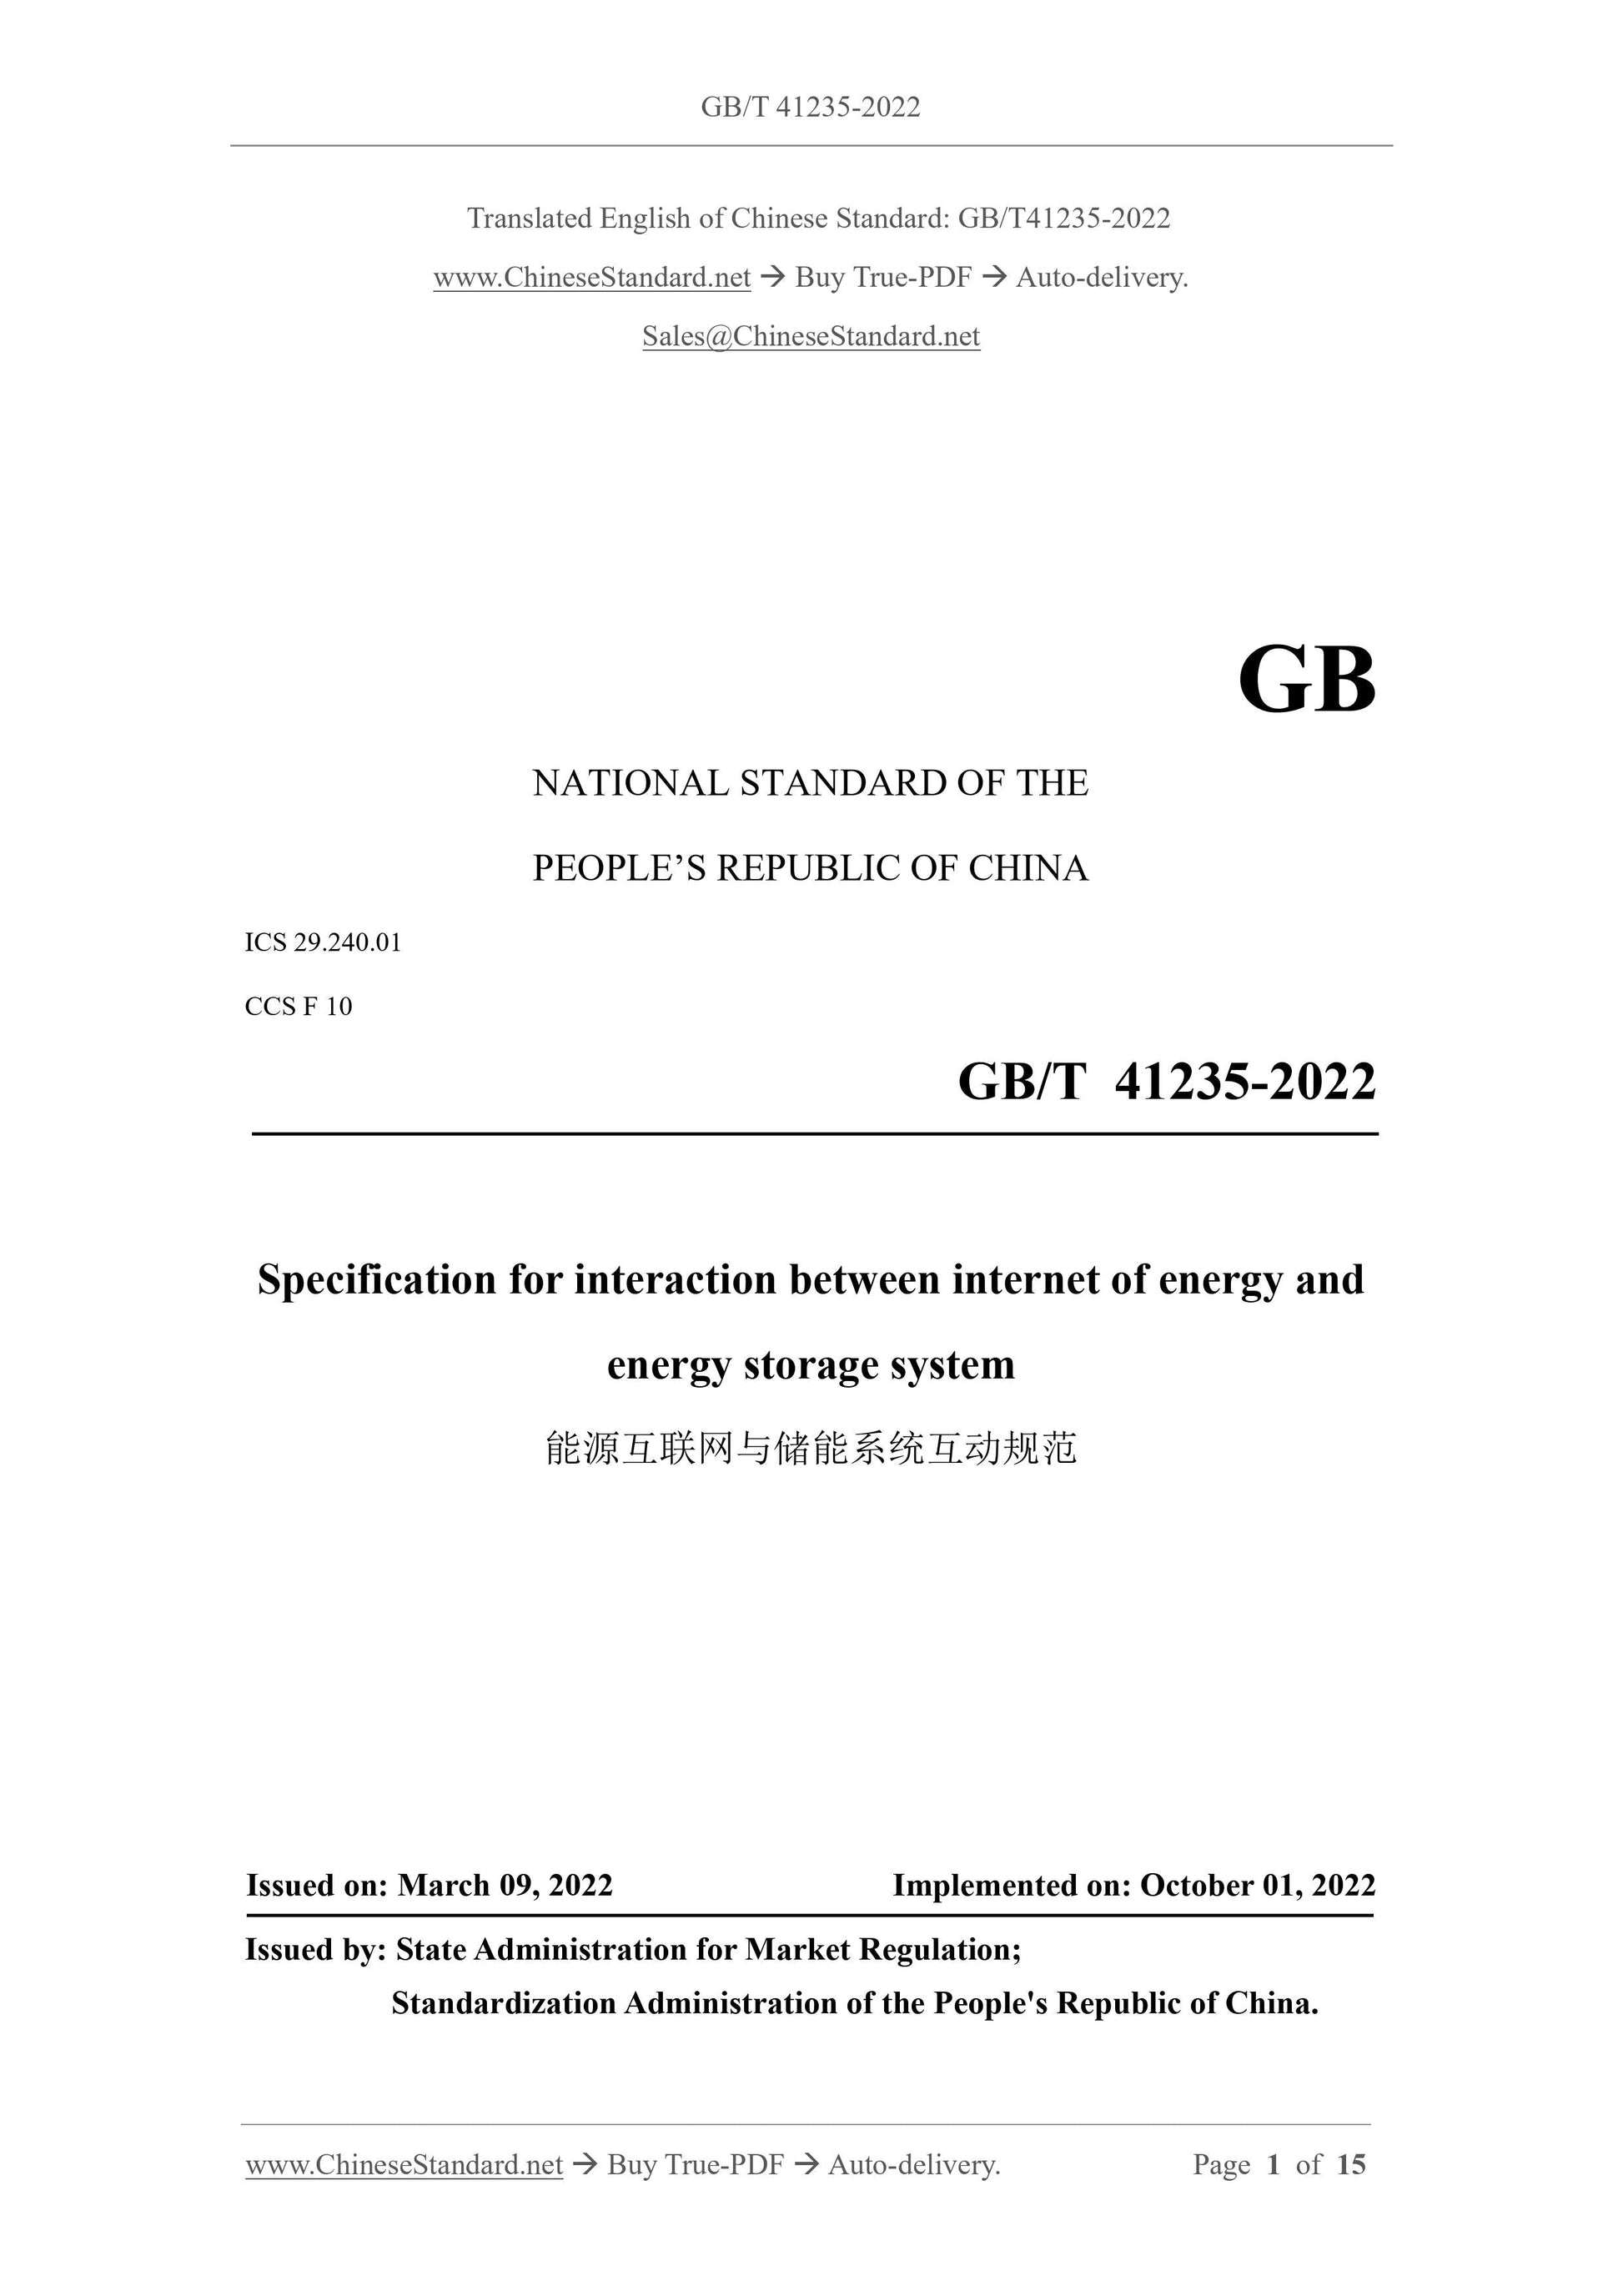 GB/T 41235-2022 Page 1